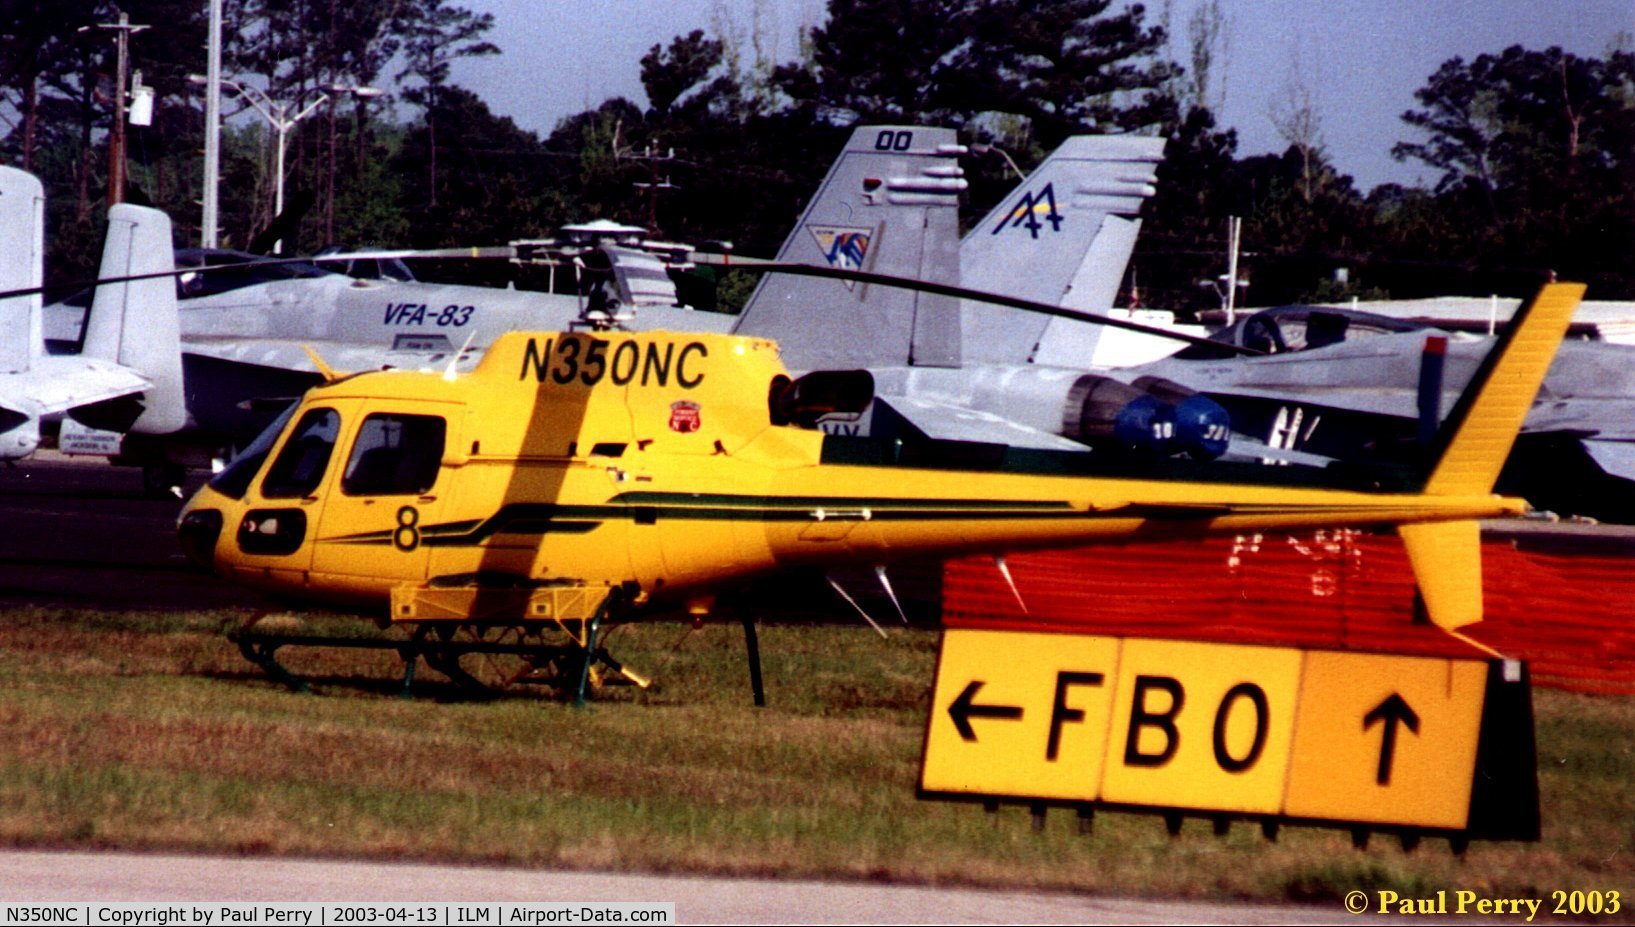 N350NC, 2001 Eurocopter AS-350B-3 Ecureuil Ecureuil C/N 3472, Operated by the NC Forestry Dept, on static at the Wilmington Airshow